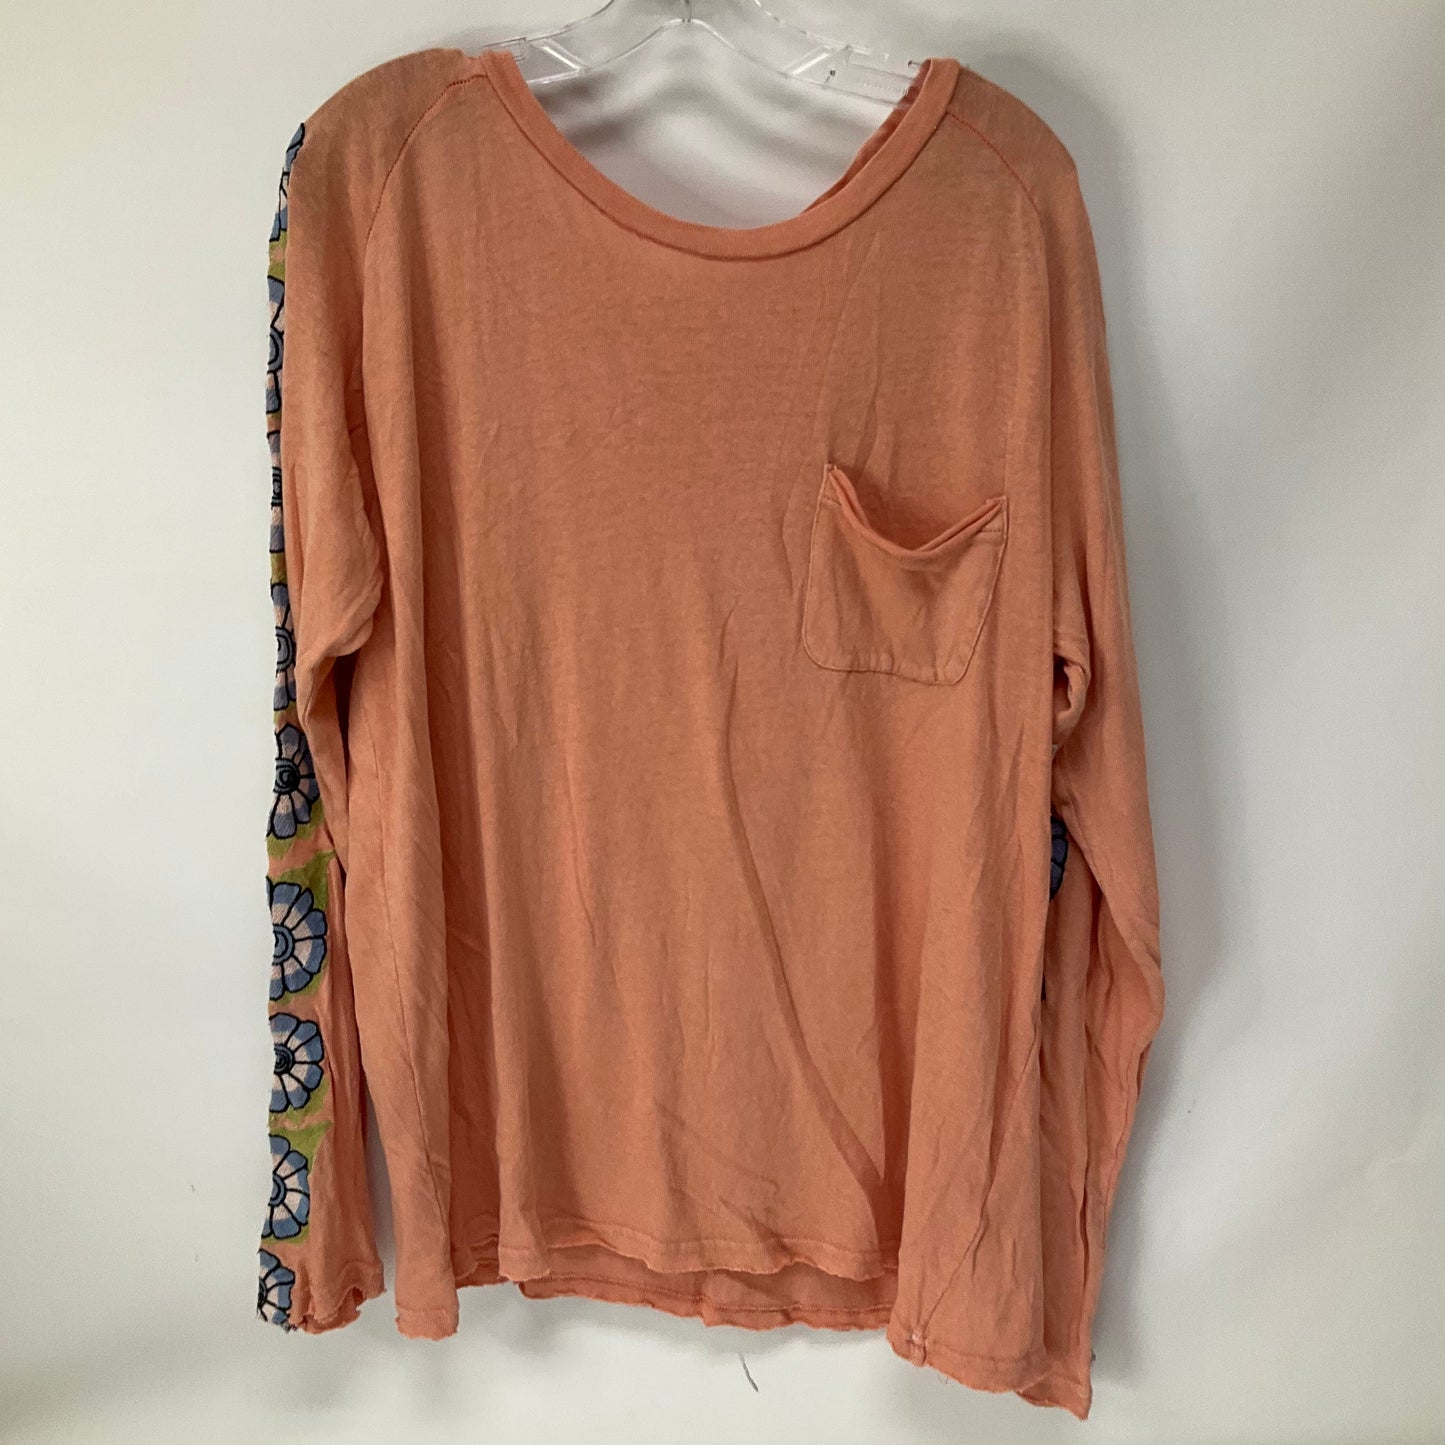 Peach Top Long Sleeve Free People, Size M